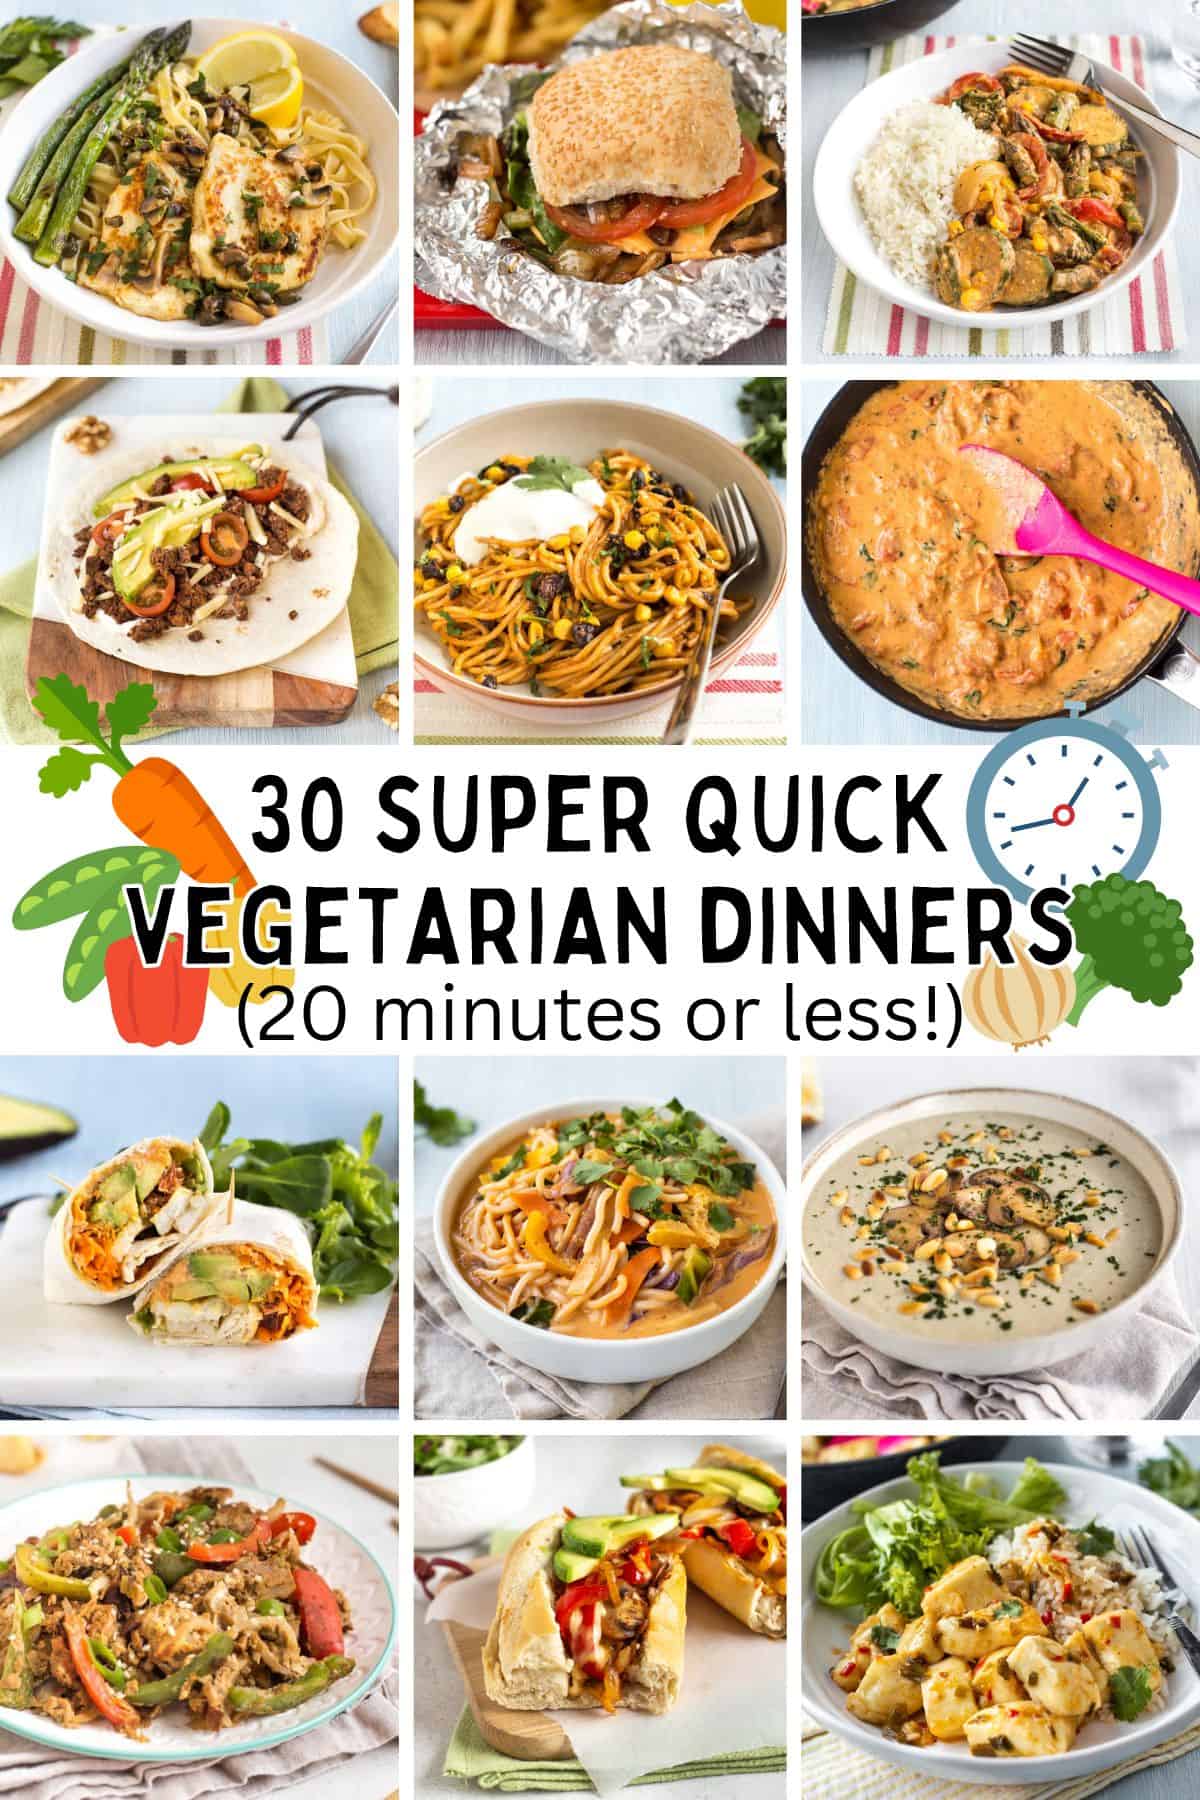 A collage showing super quick vegetarian dinners with text overlay.